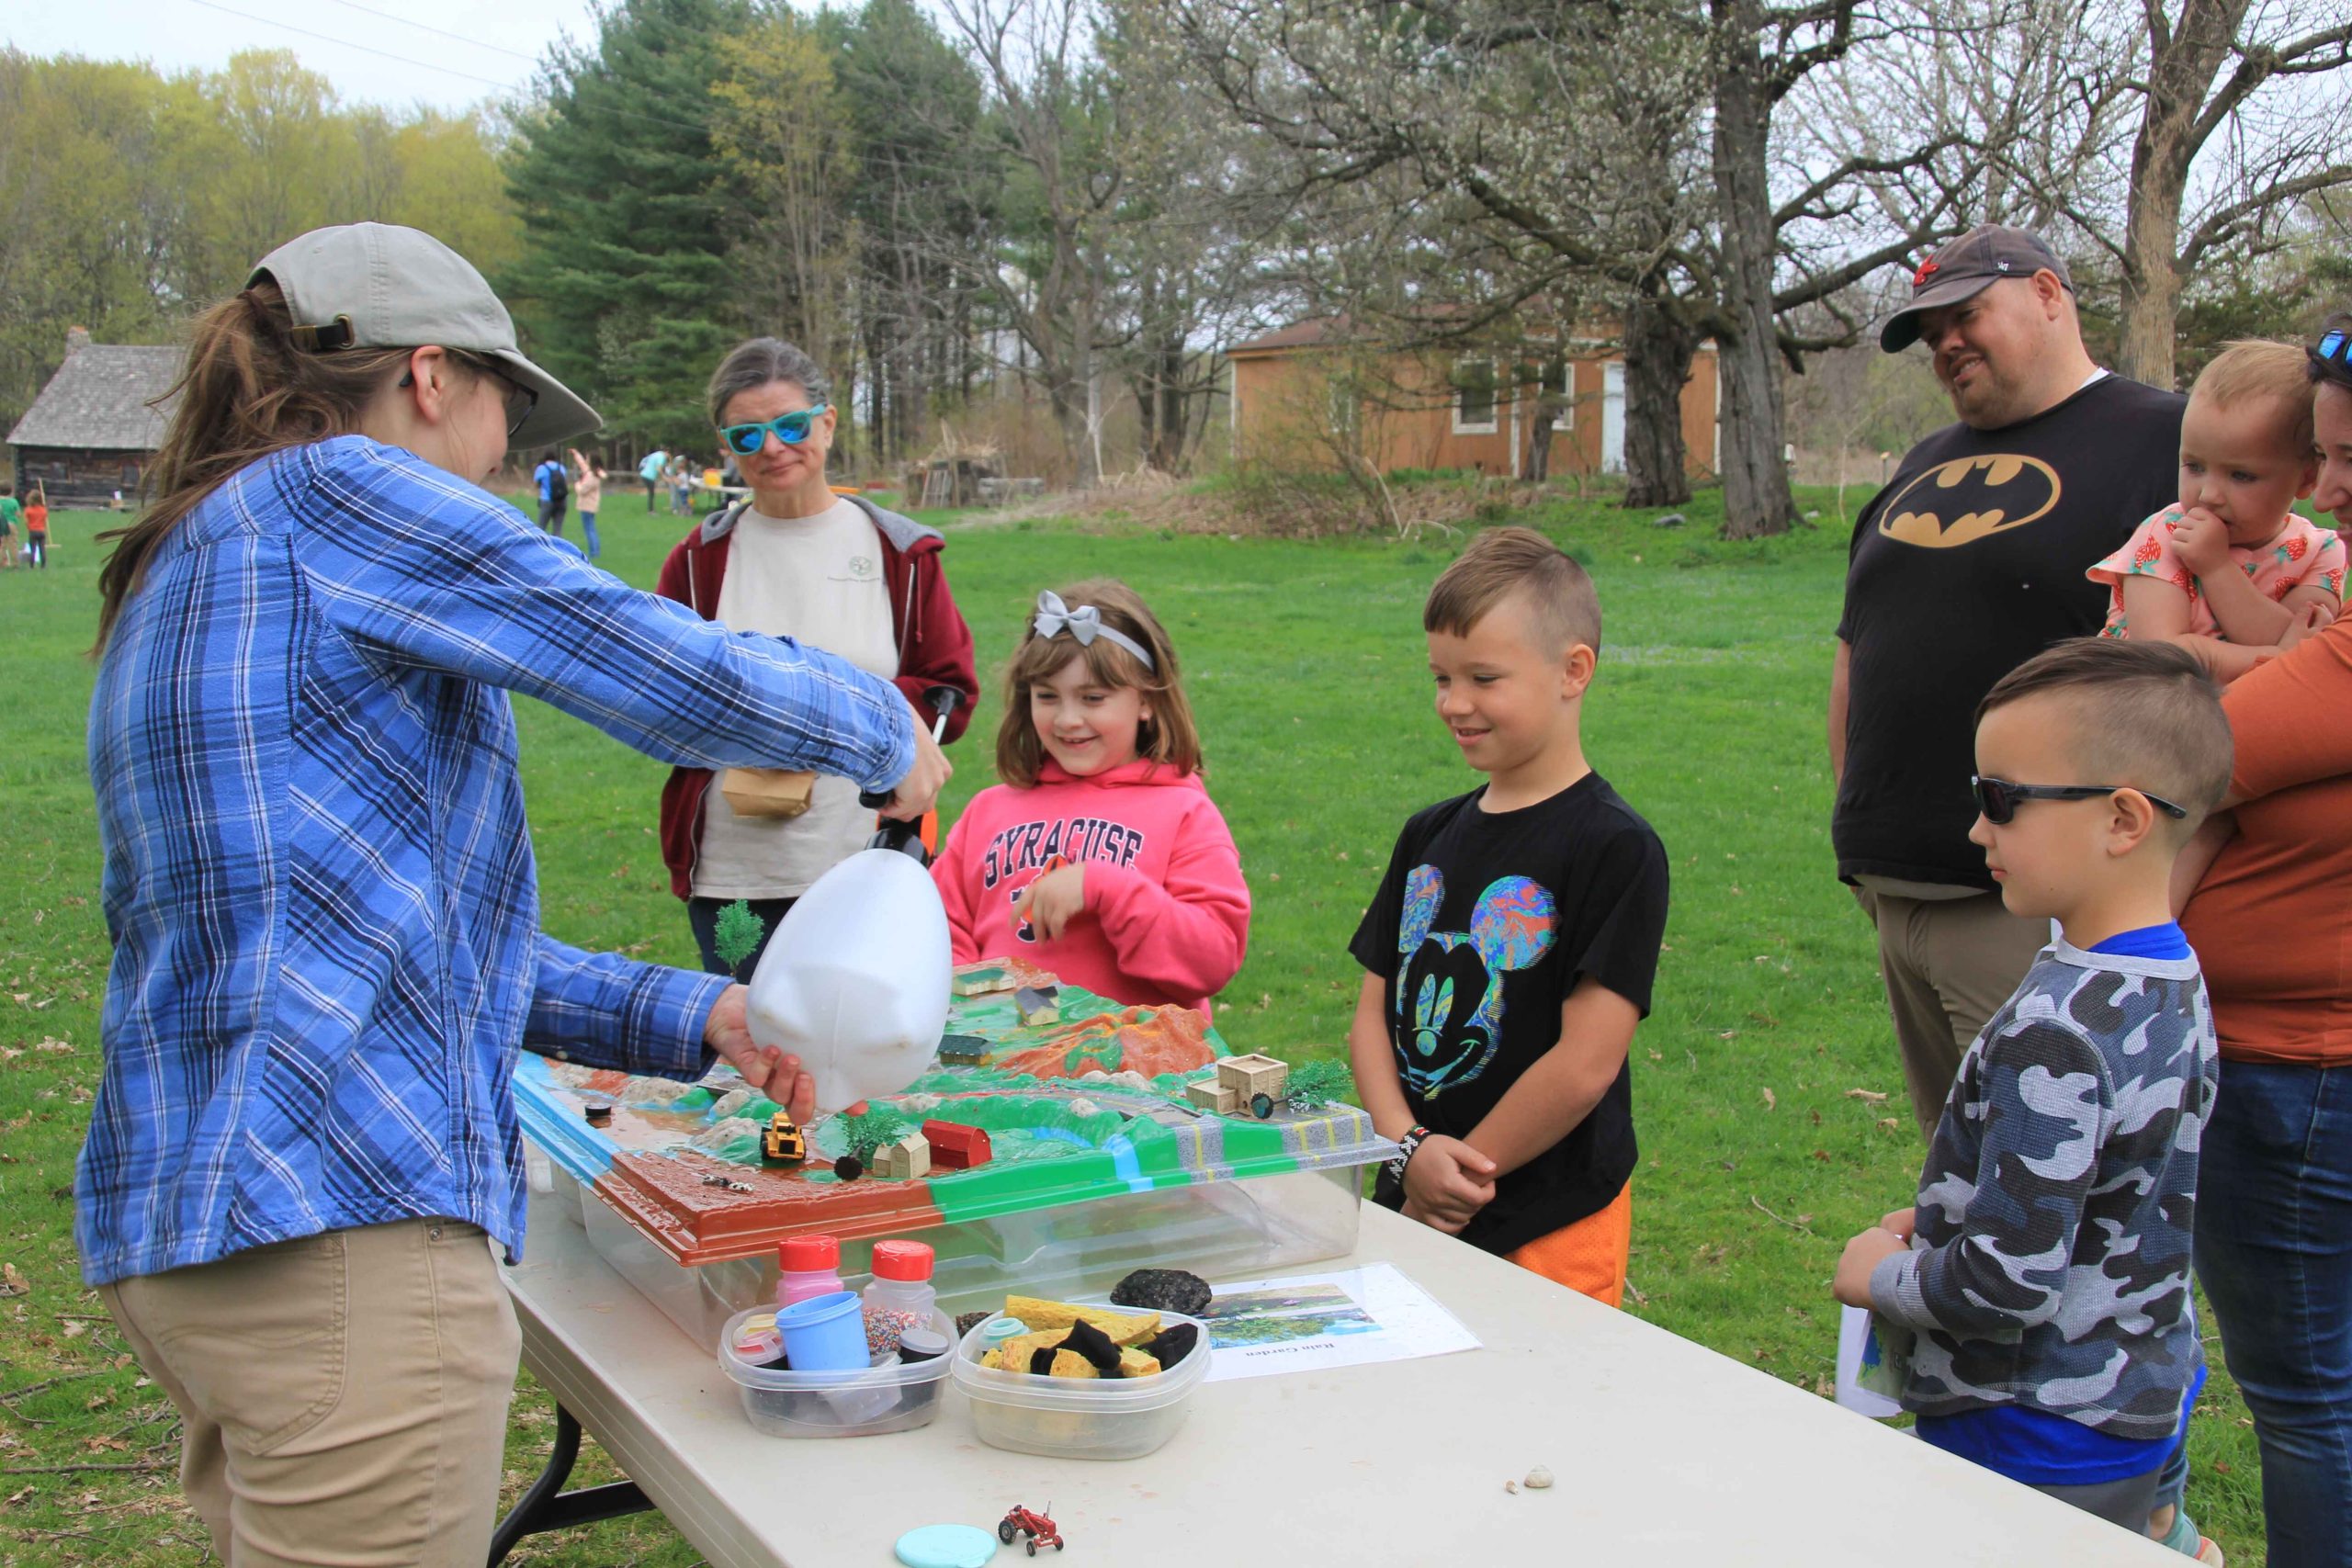 Watershed model demonstration by an environmental educator Parking crew at the 2023 Earth Day Celebration at Baltimore Woods.